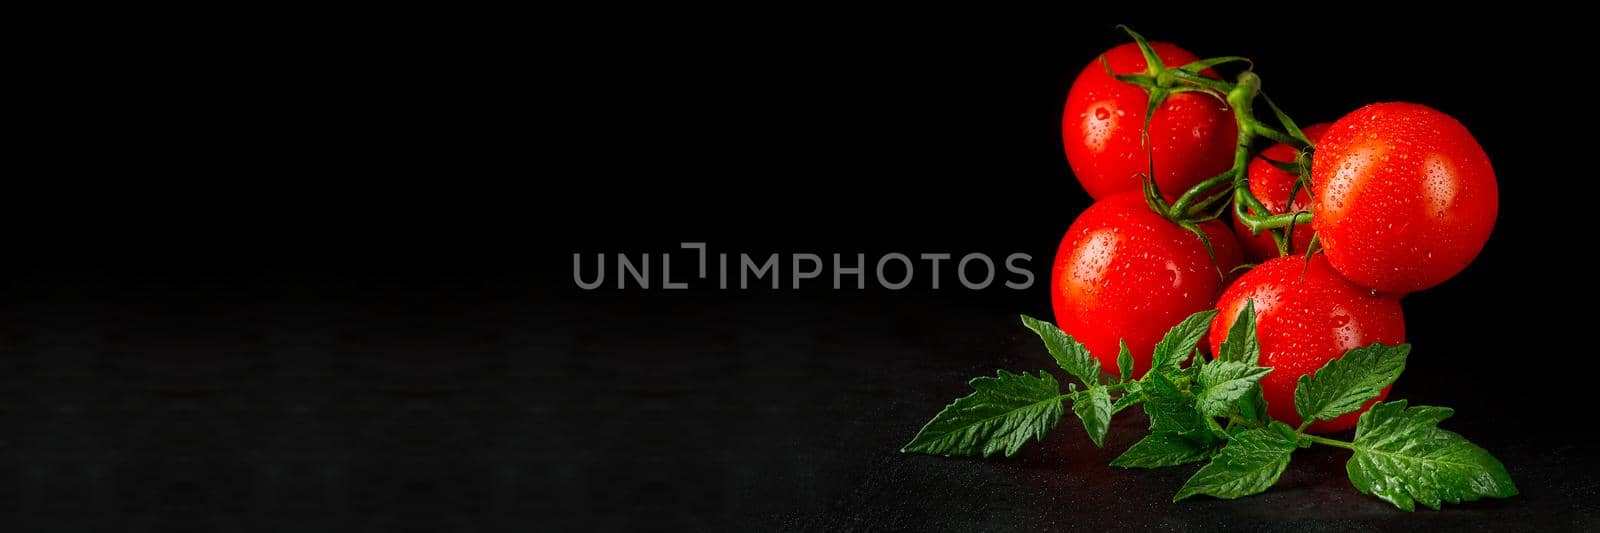 Ripe organic tomatoes on the black table in low key with water drops by PhotoTime